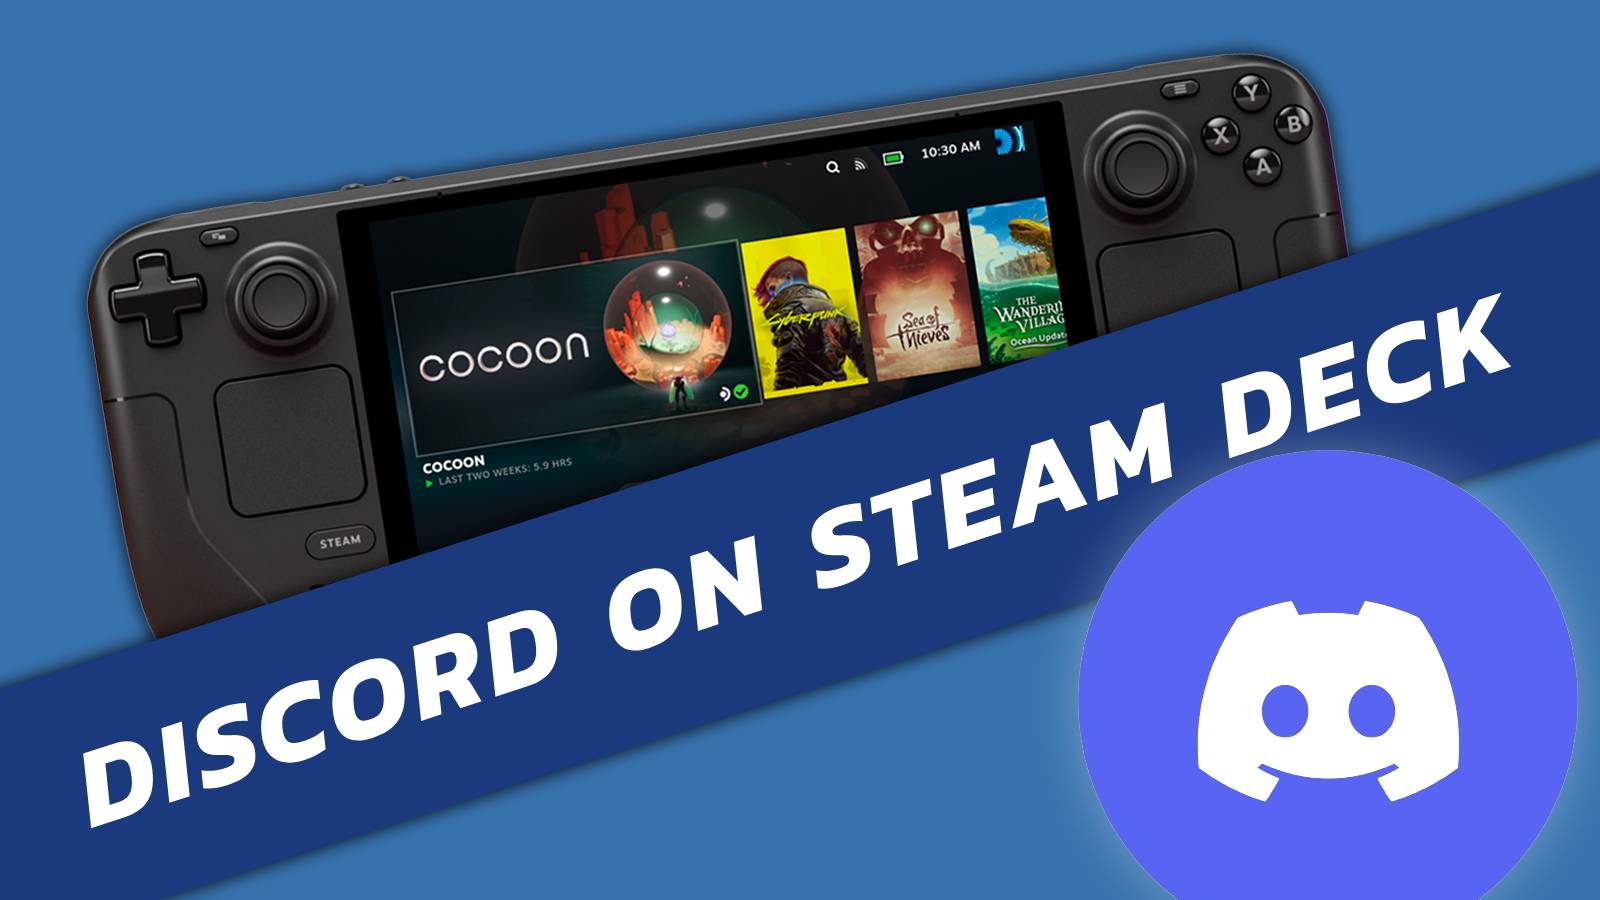 Image of a Steam Deck, with a banner across and the Discord logo in the bottom right corner.